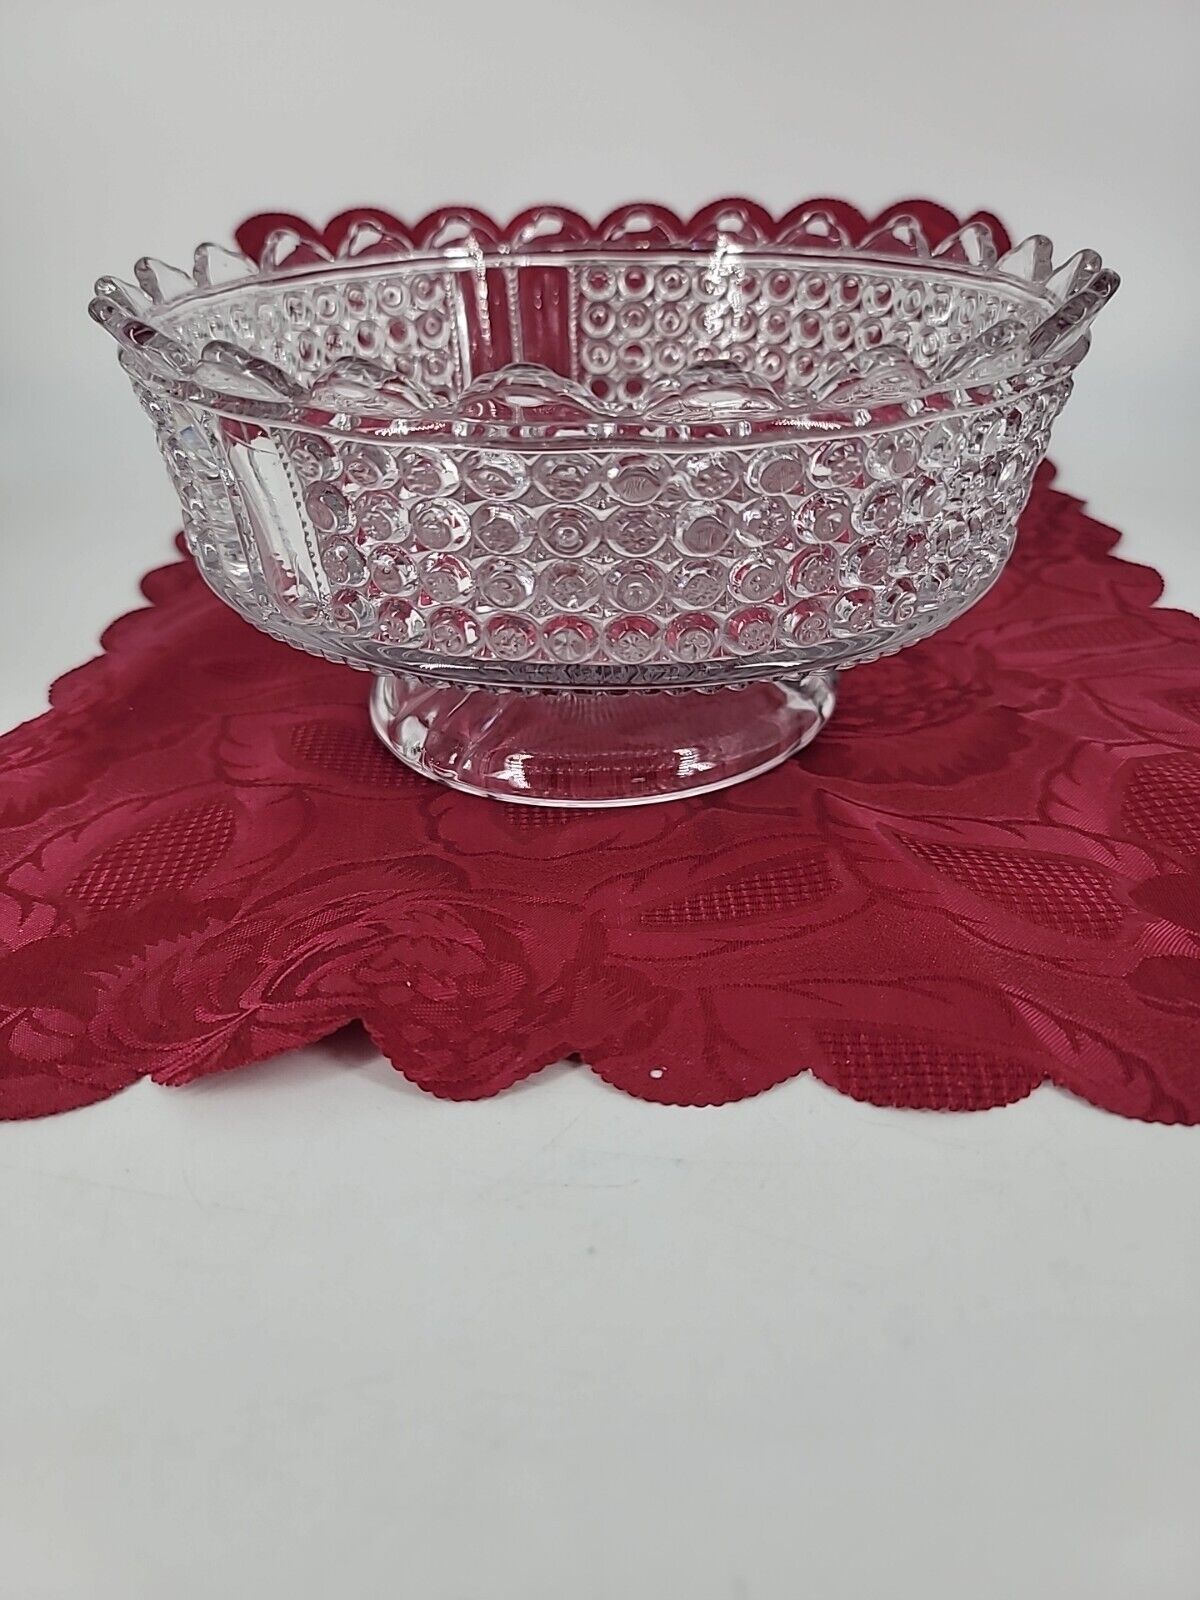 Clear Pressed Glass Compote Bowl/Vase 1874 - 1891 Thousand Eye EAPG Adams & Co. 